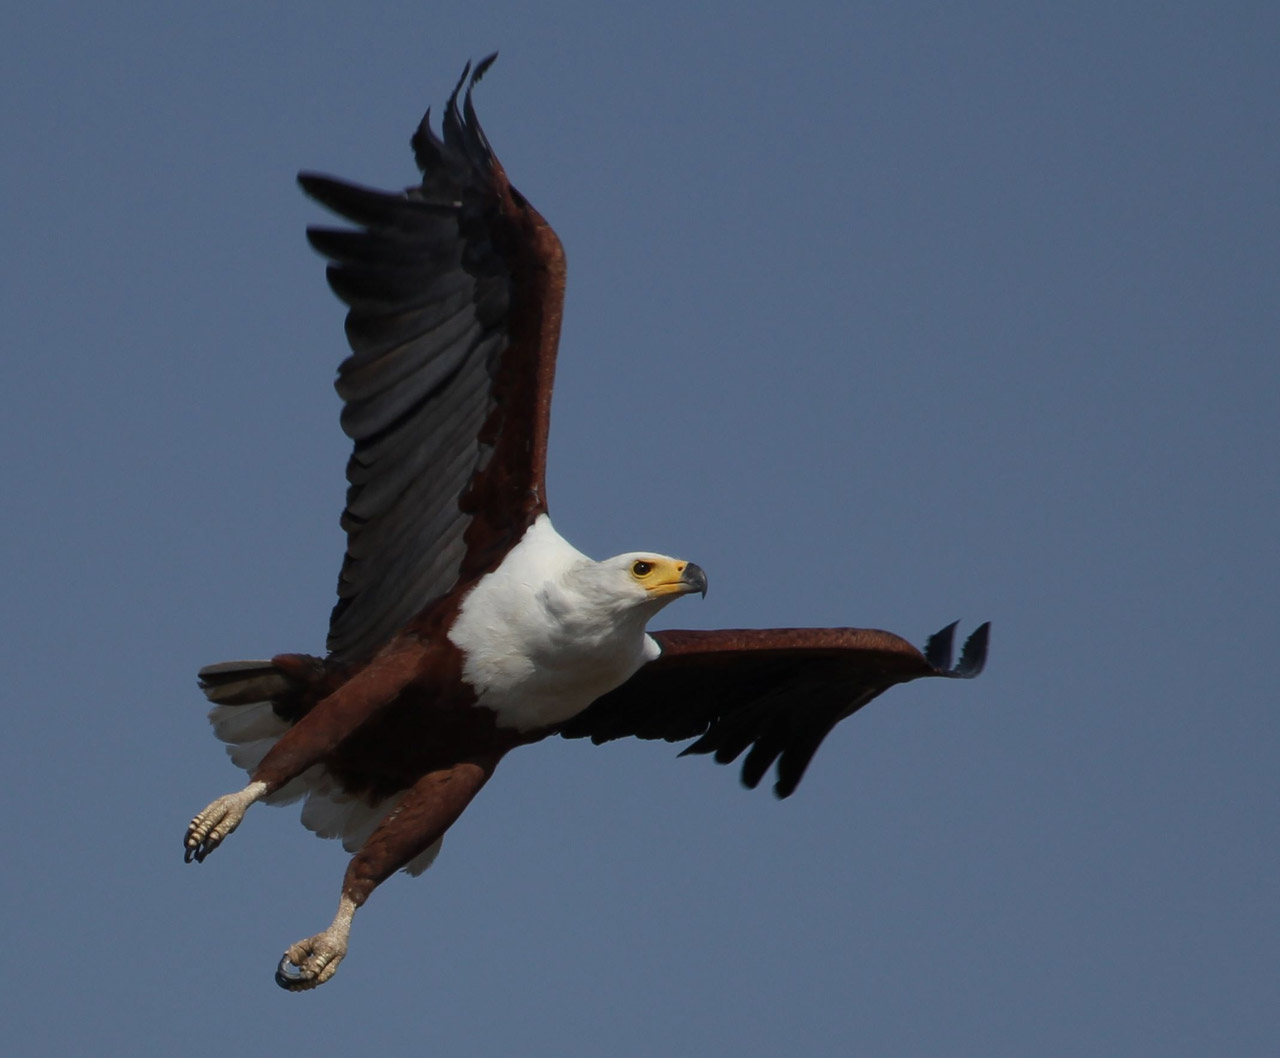 The king of the waterways – a fish eagle takes flight